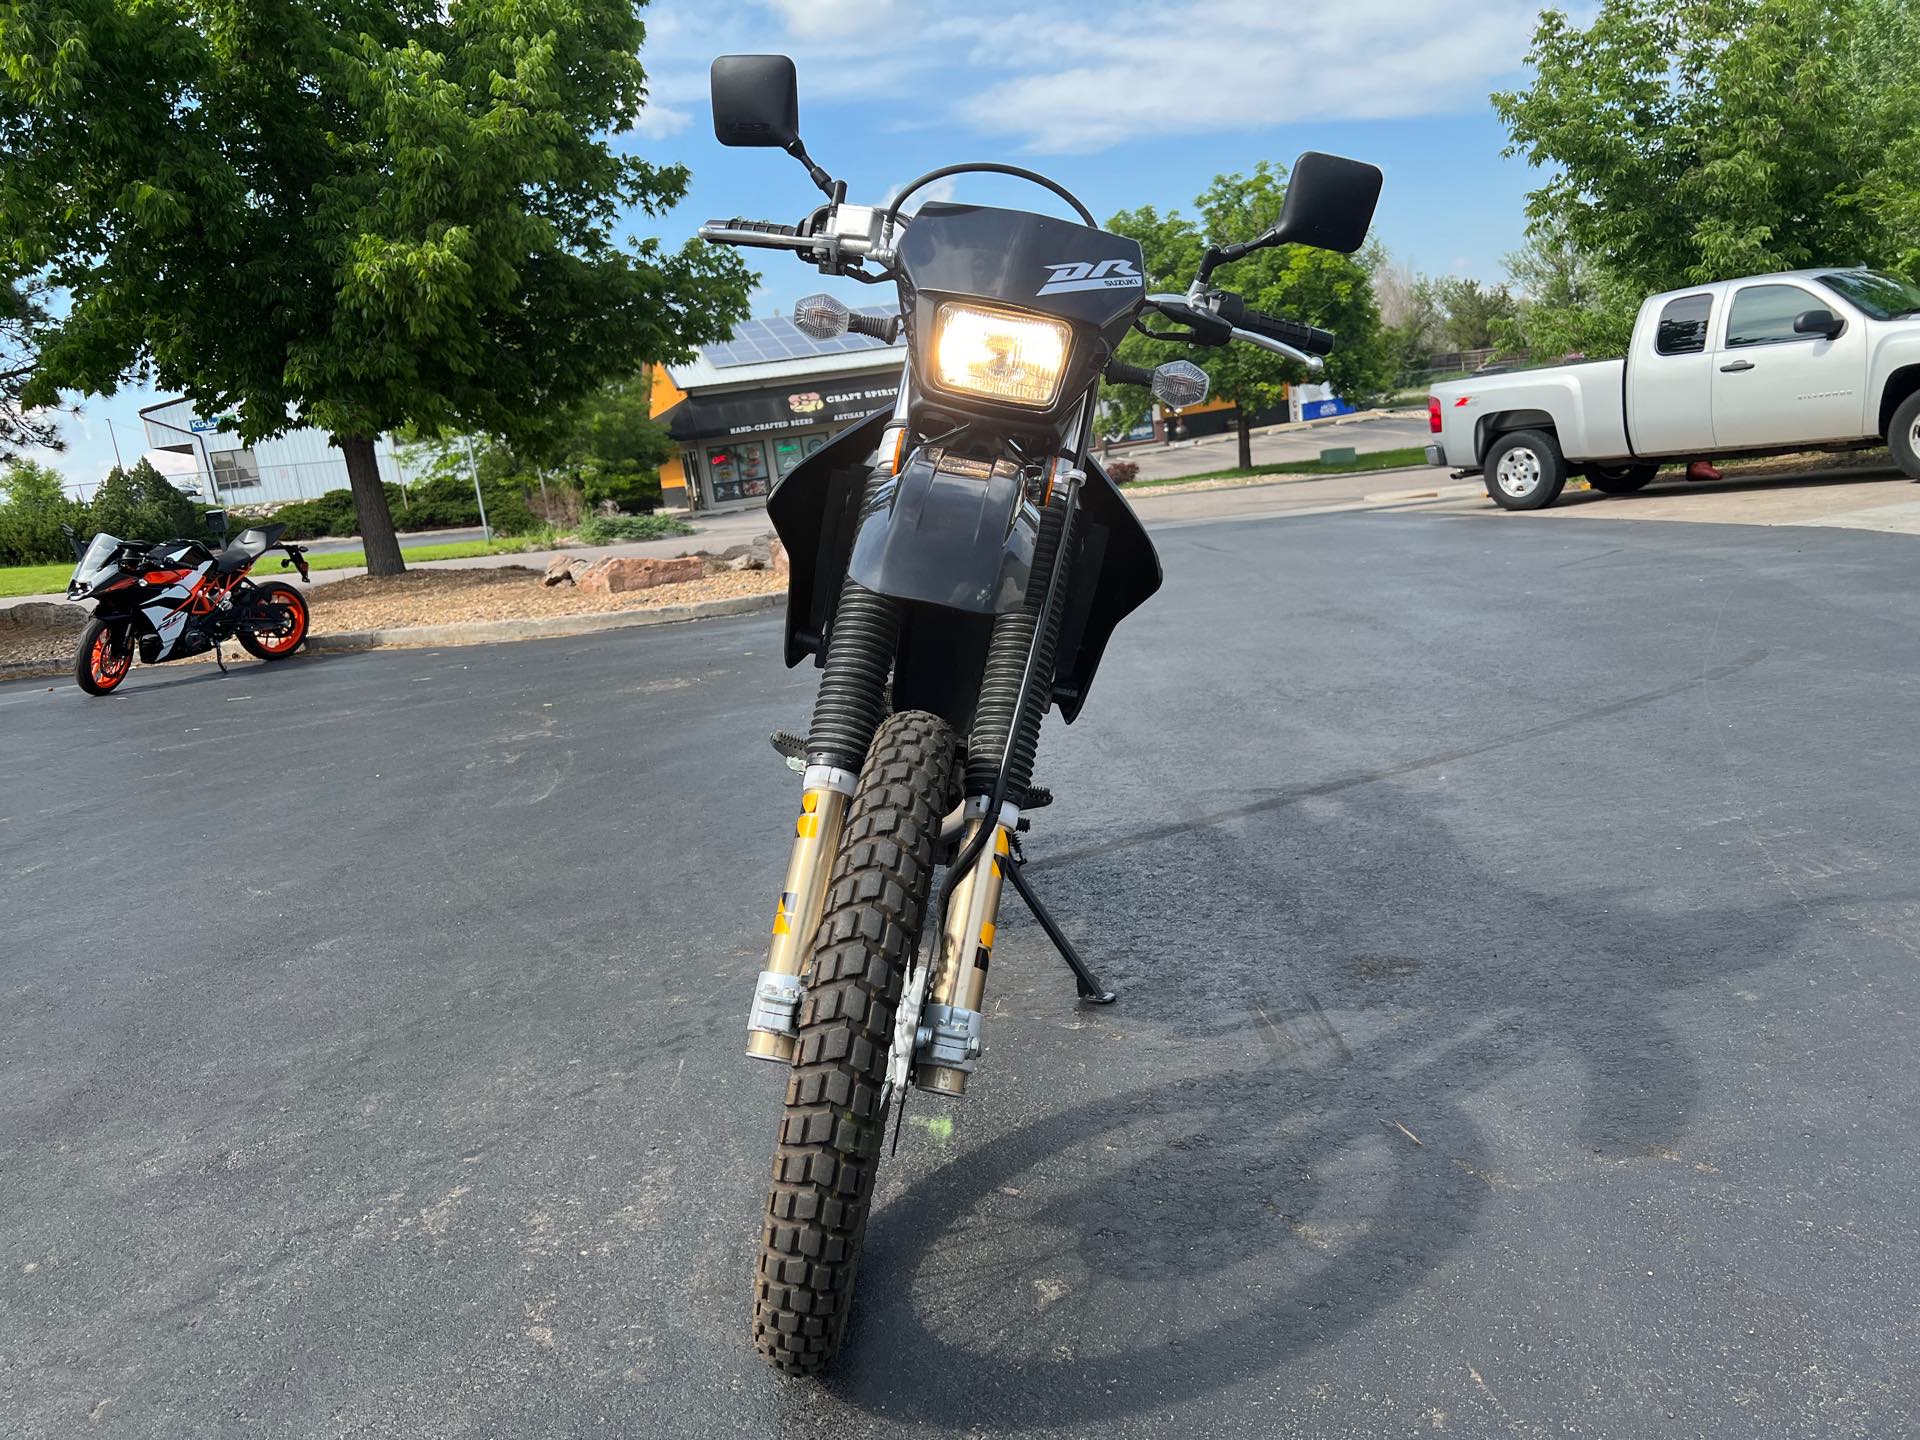 2020 Suzuki DR-Z 400S Base at Aces Motorcycles - Fort Collins